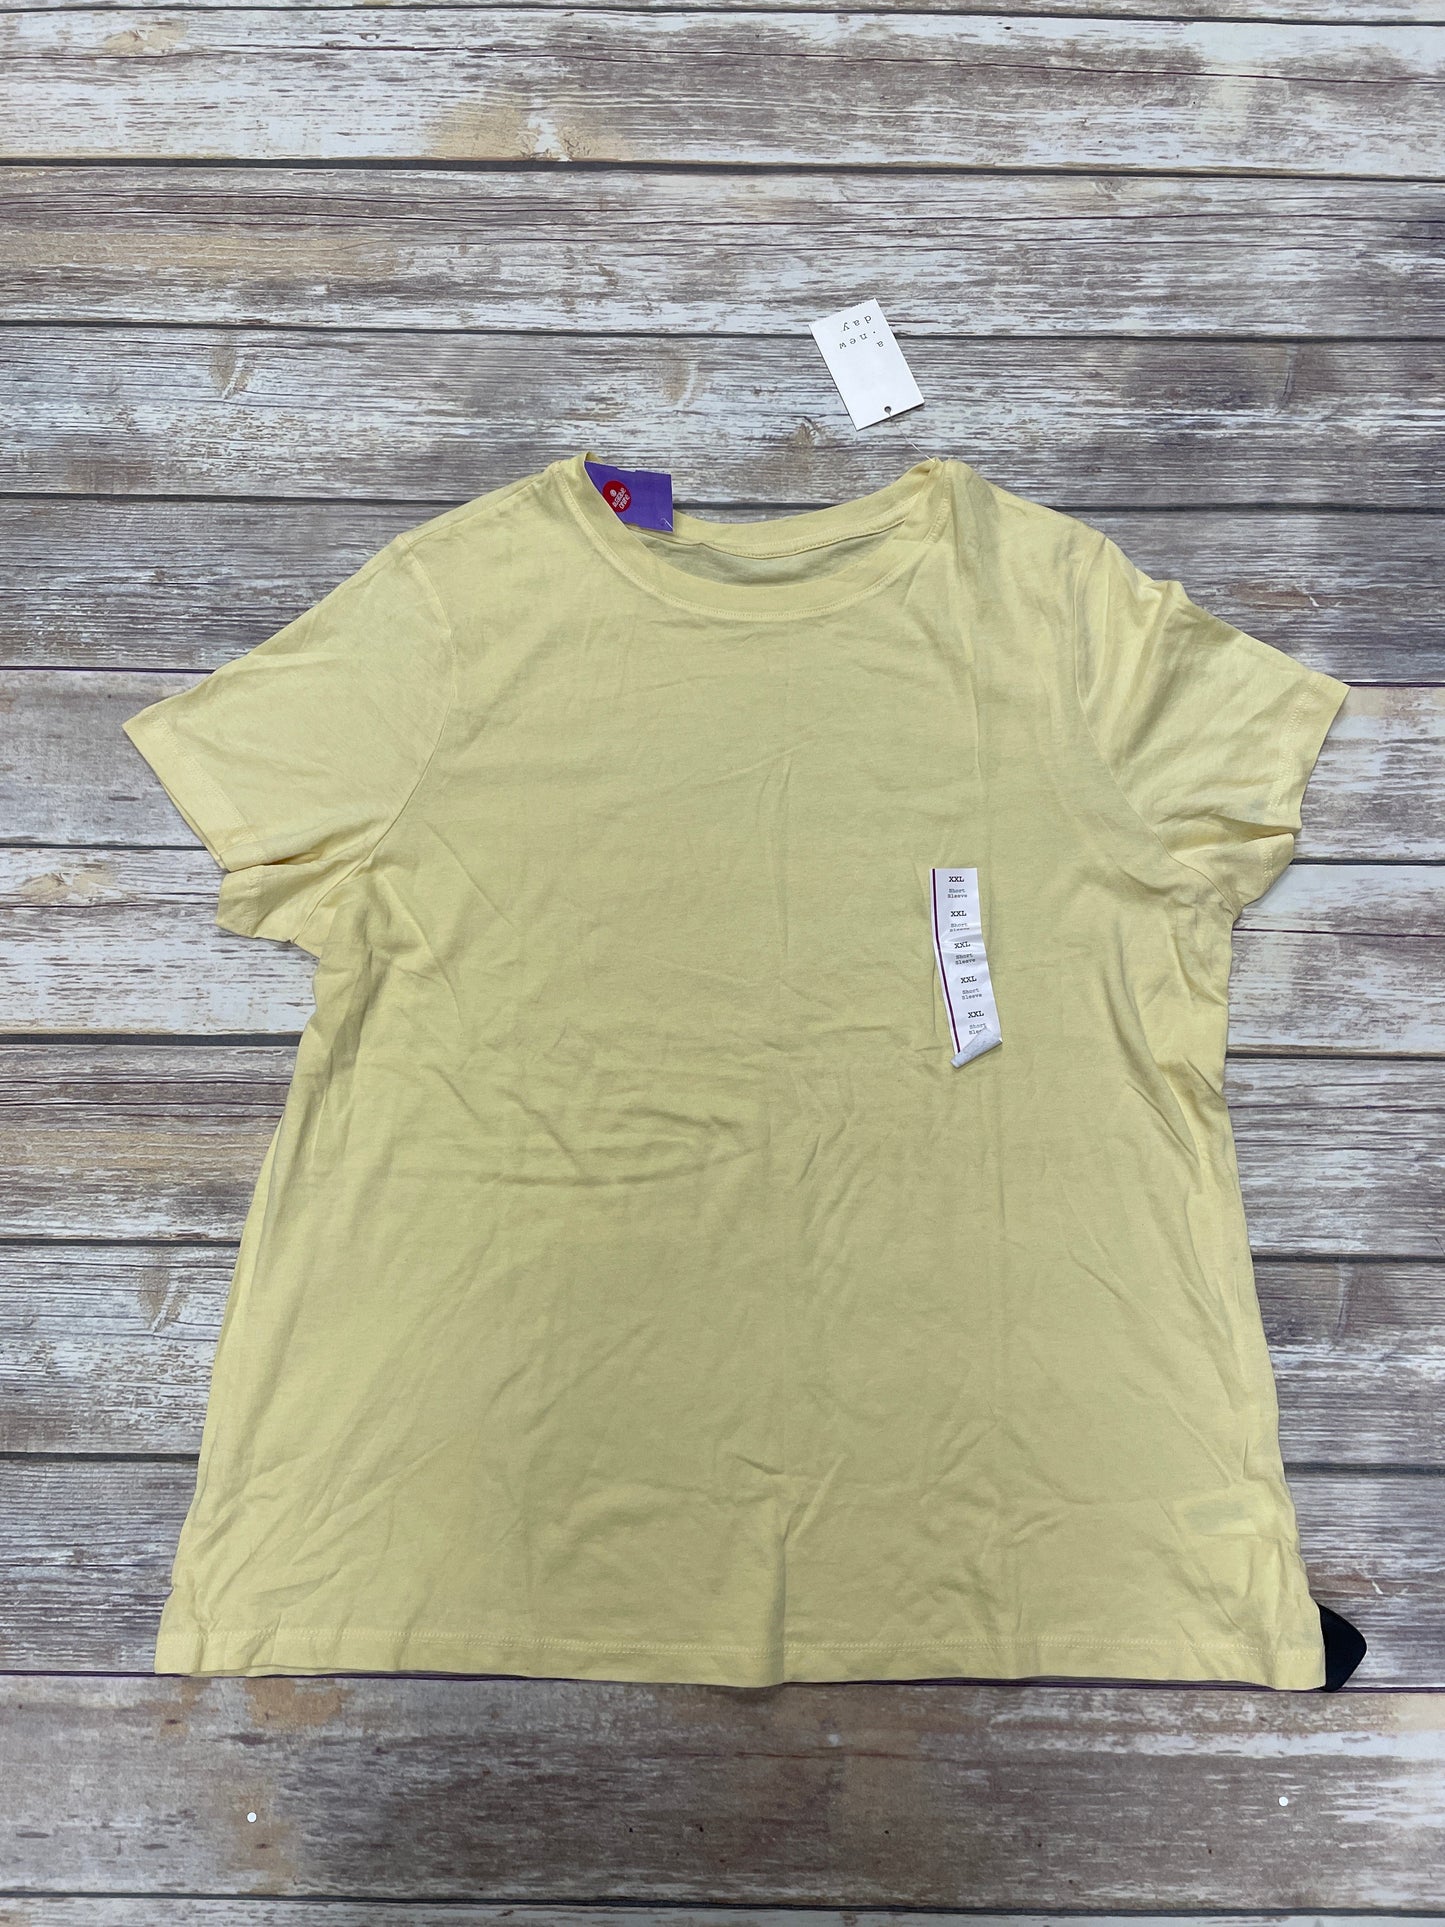 Yellow Top Short Sleeve A New Day, Size Xxl